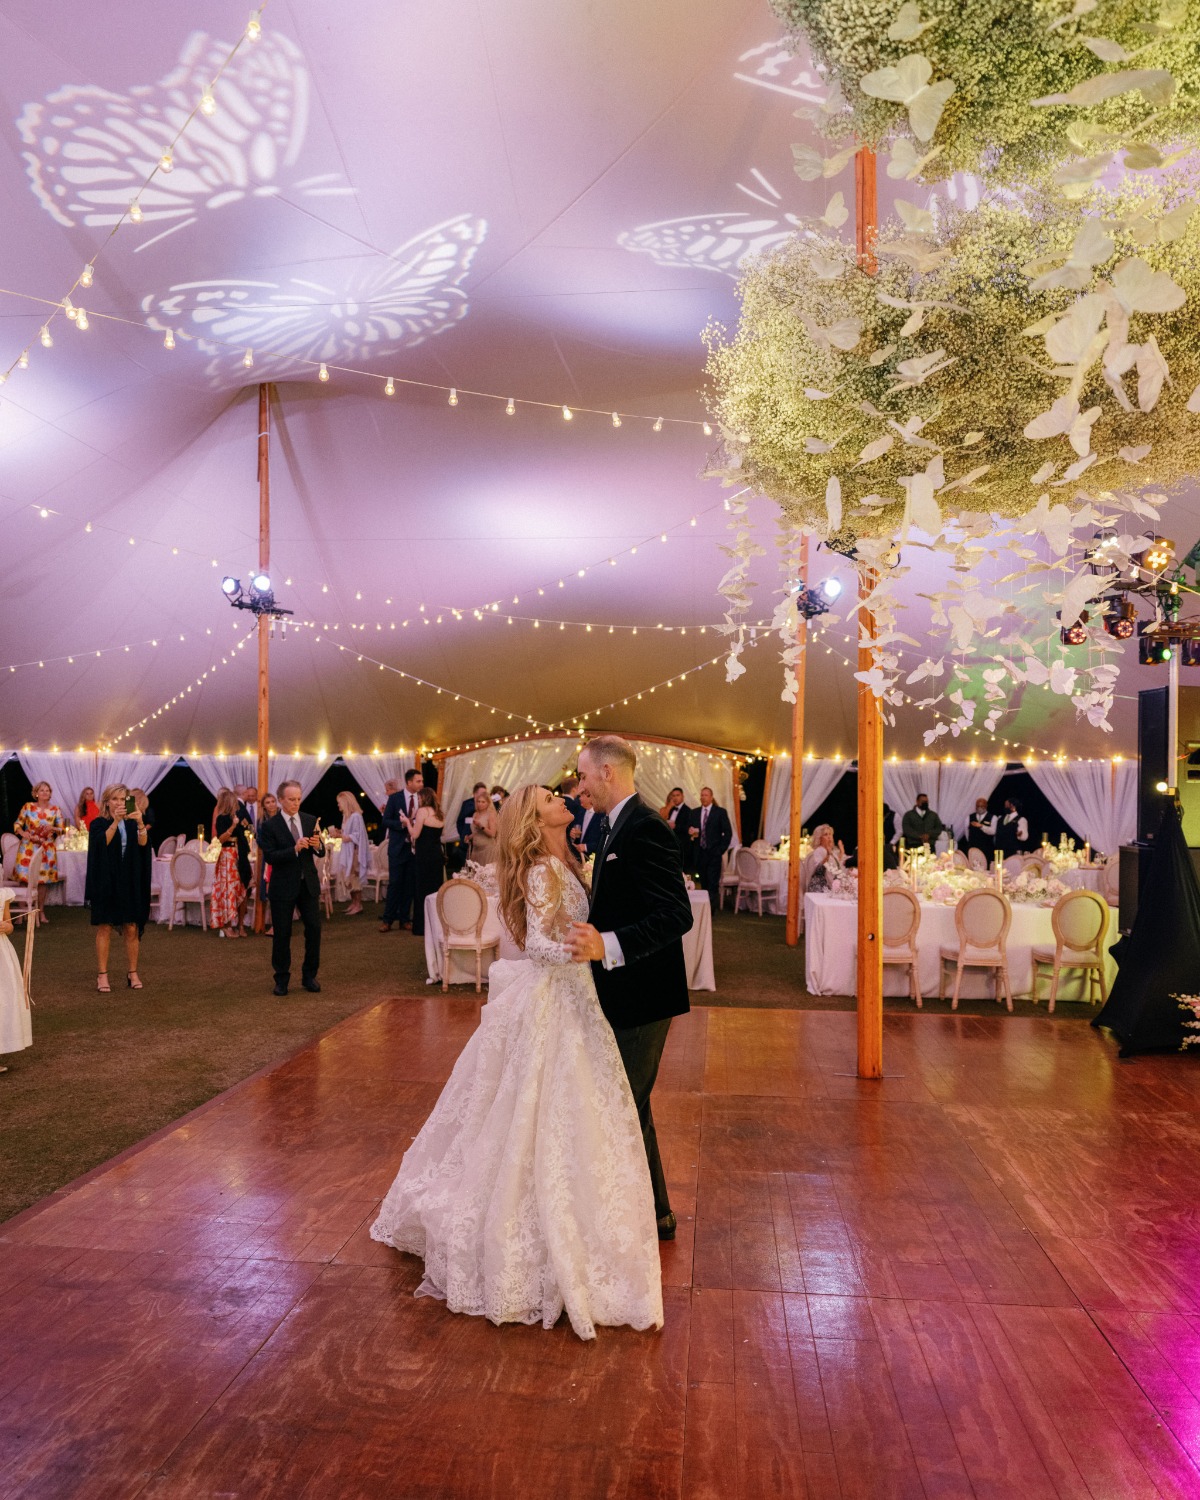 Bride and groom first dance under baby's breath clouds and butterflies